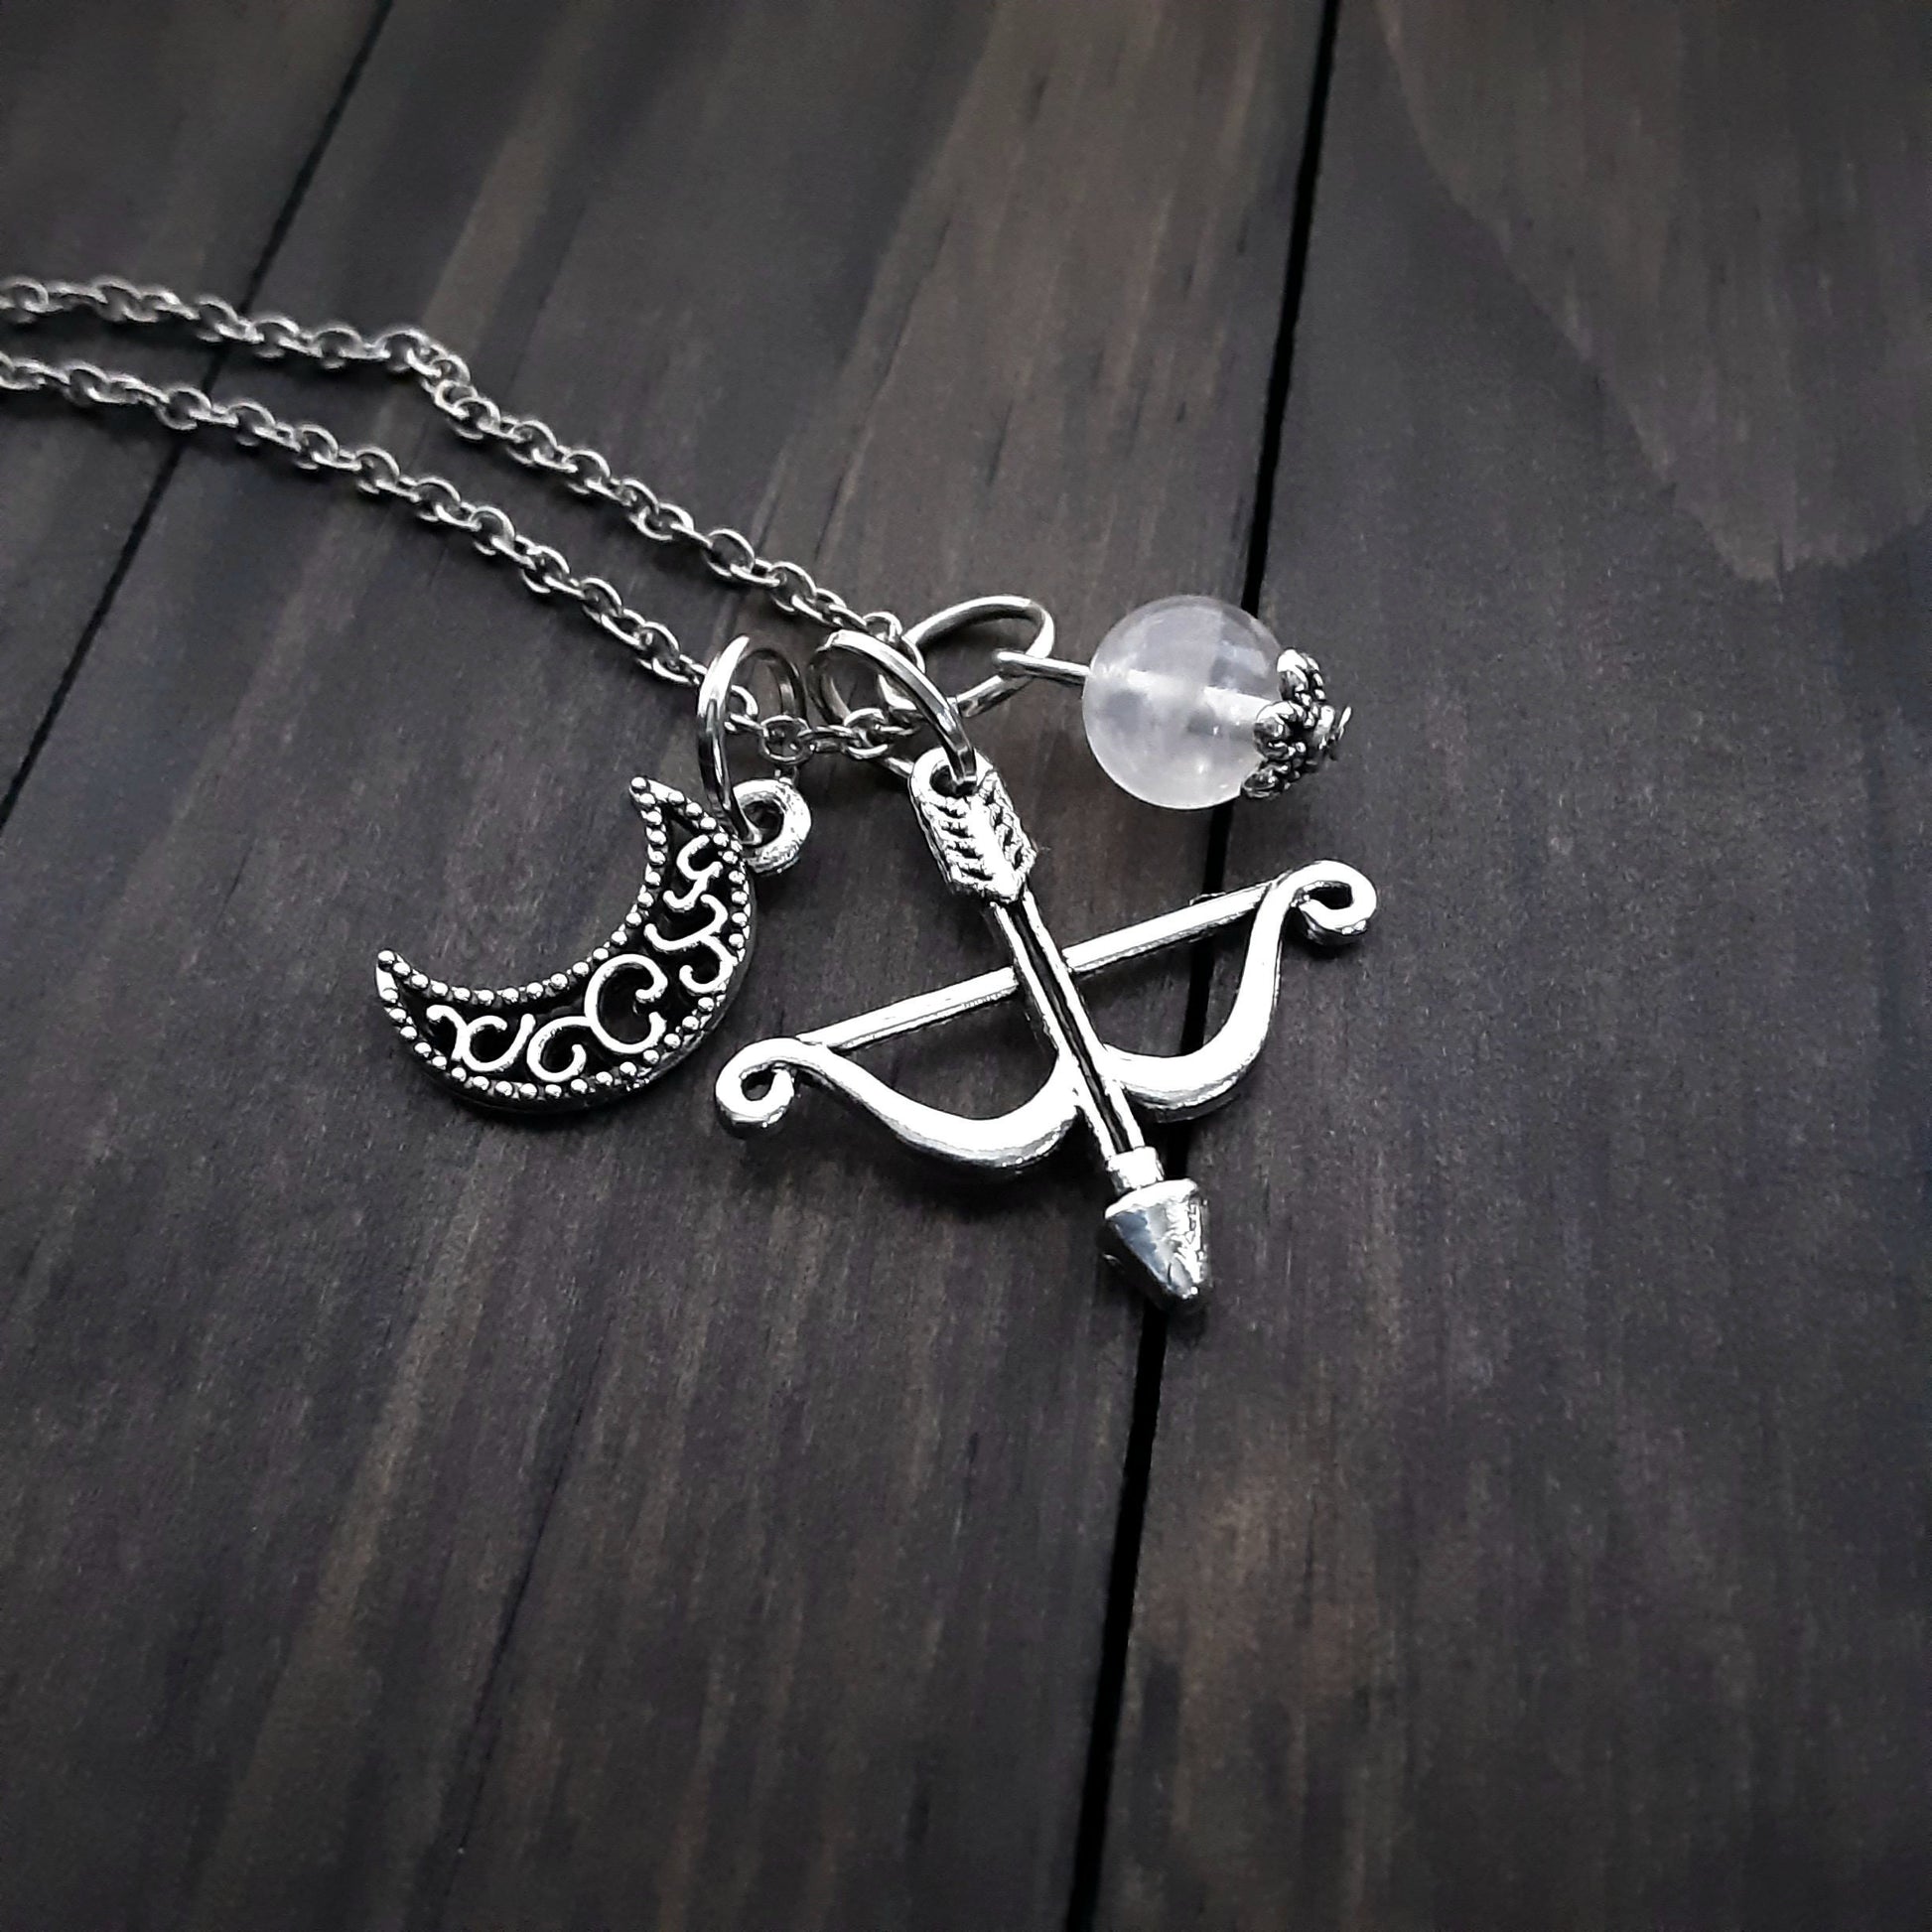 Artemis necklace for Greek Goddess of the Hunt and animals Necklace has bow and arrow charm, crescent moon charm,clear Quartz bead on silver color chain on wooden background